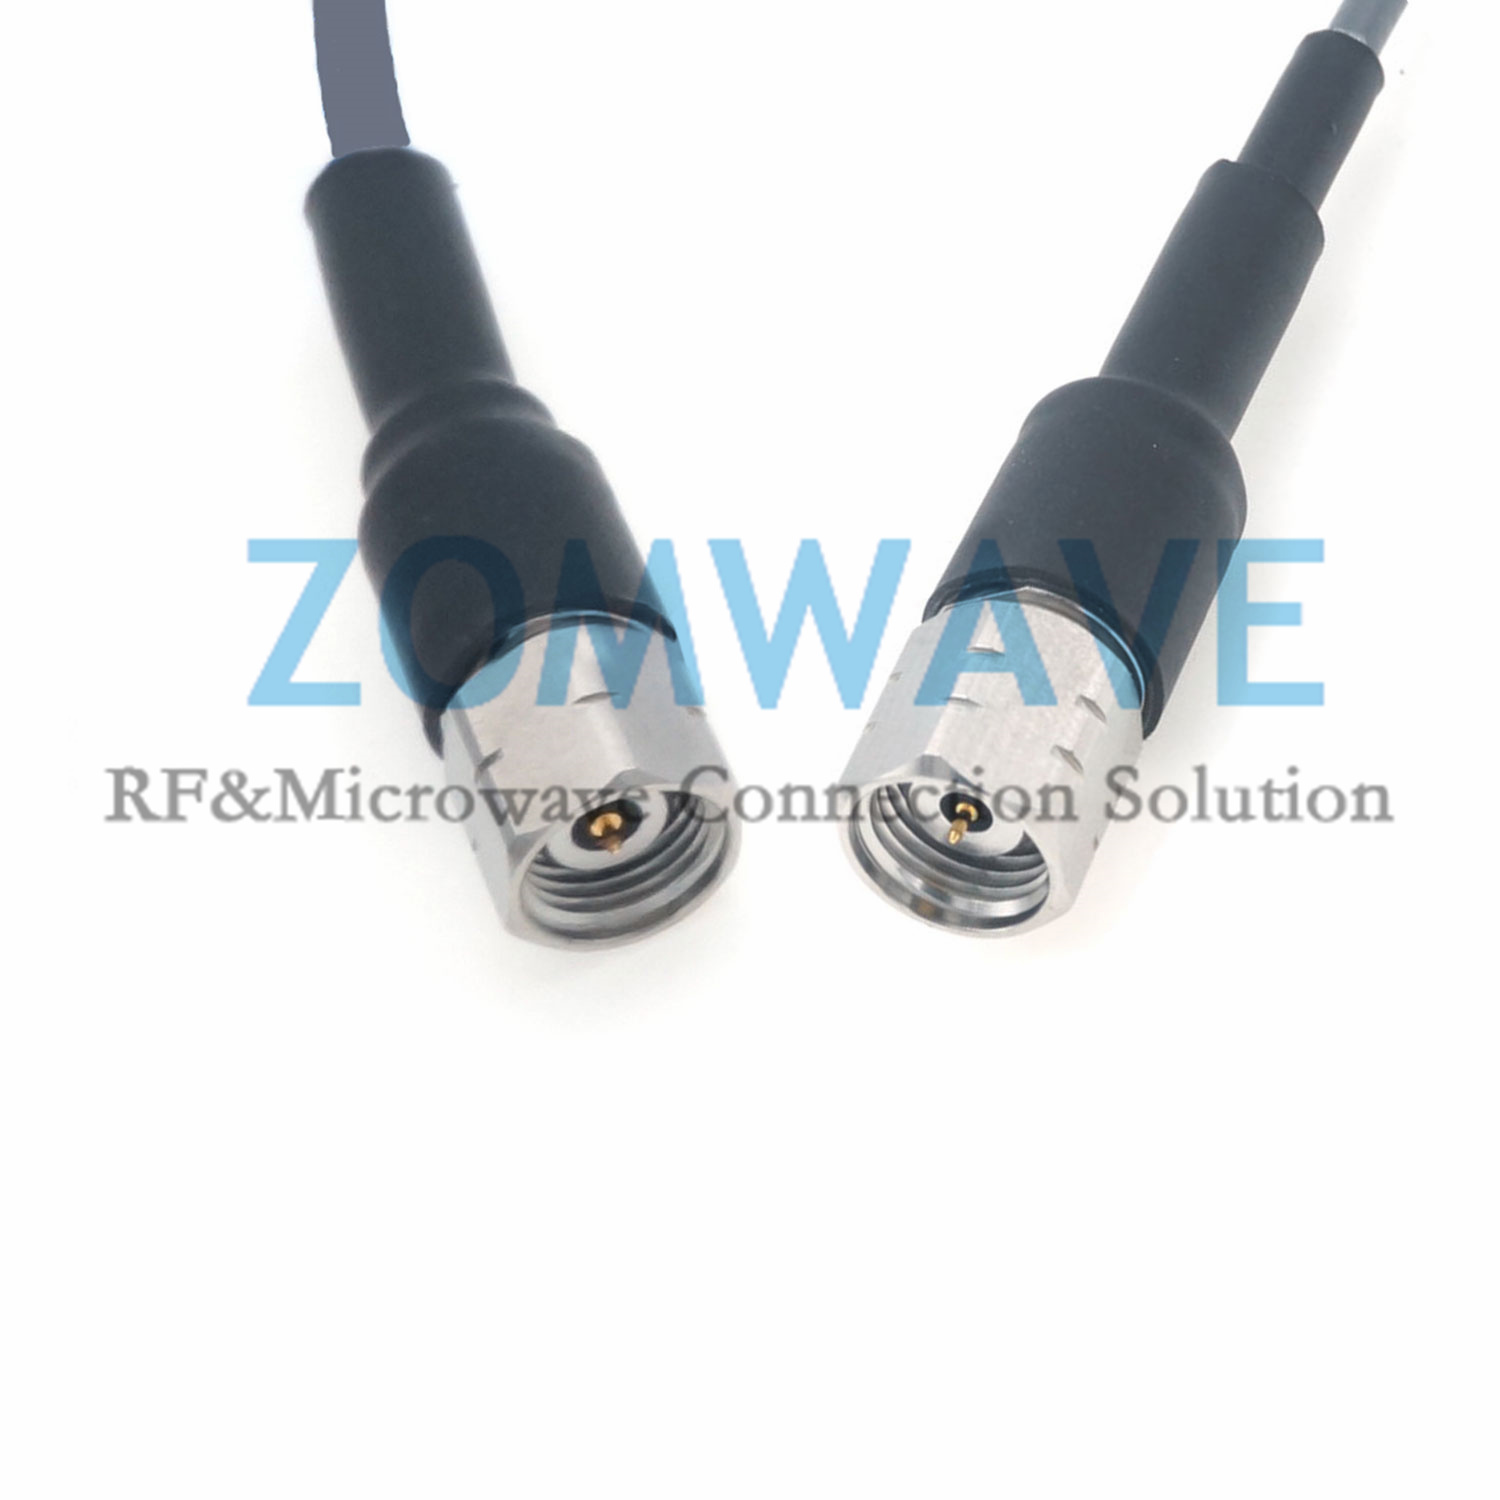 1.85mm Male to 2.4mm Male, Flexible ZCXN 3506 Cable, 50GHz